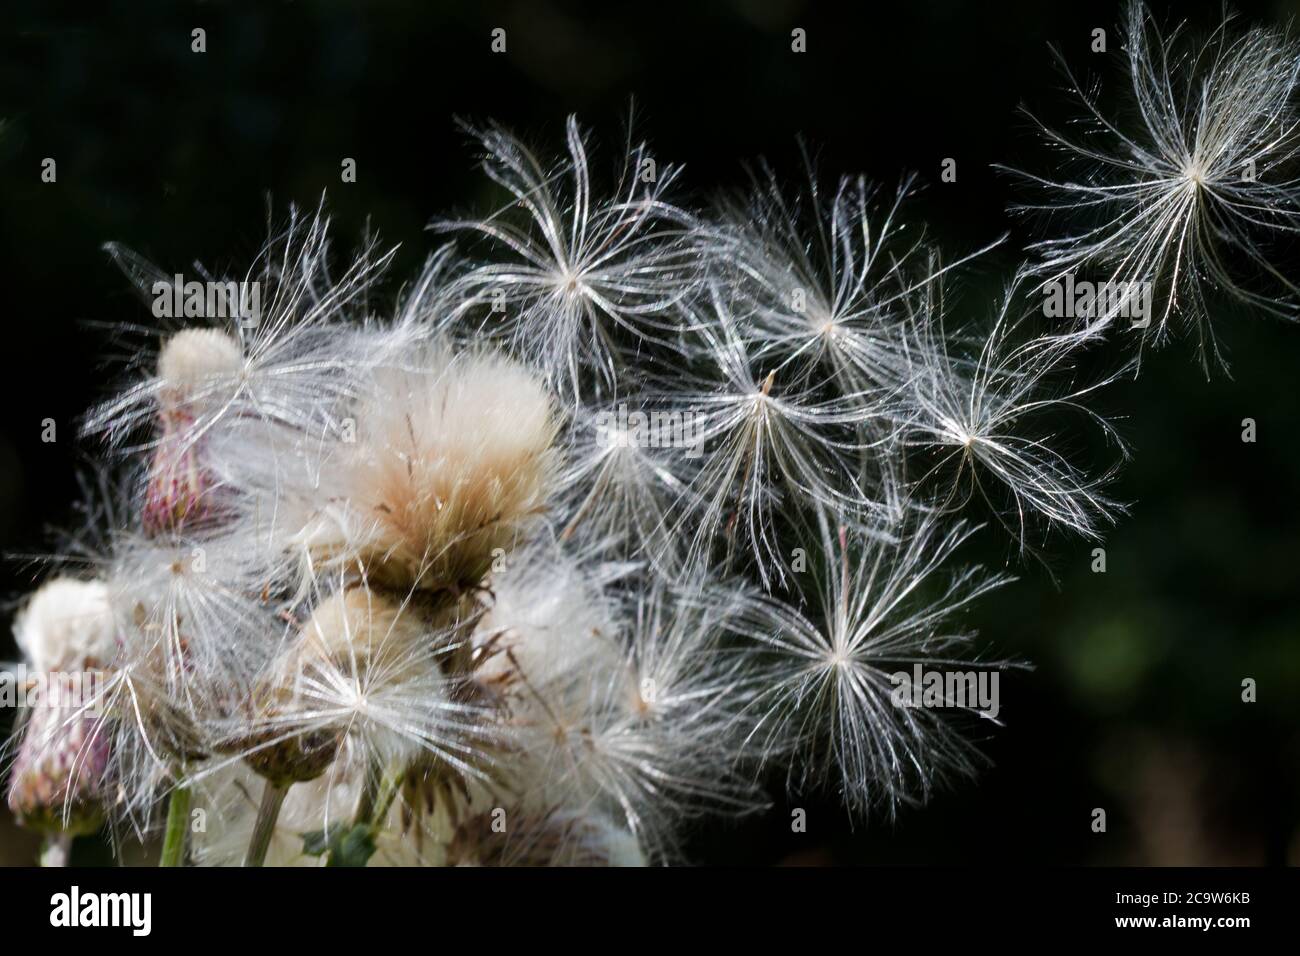 Fluffy seeds of a Thistle, thistledown, blown away by the wind Stock Photo